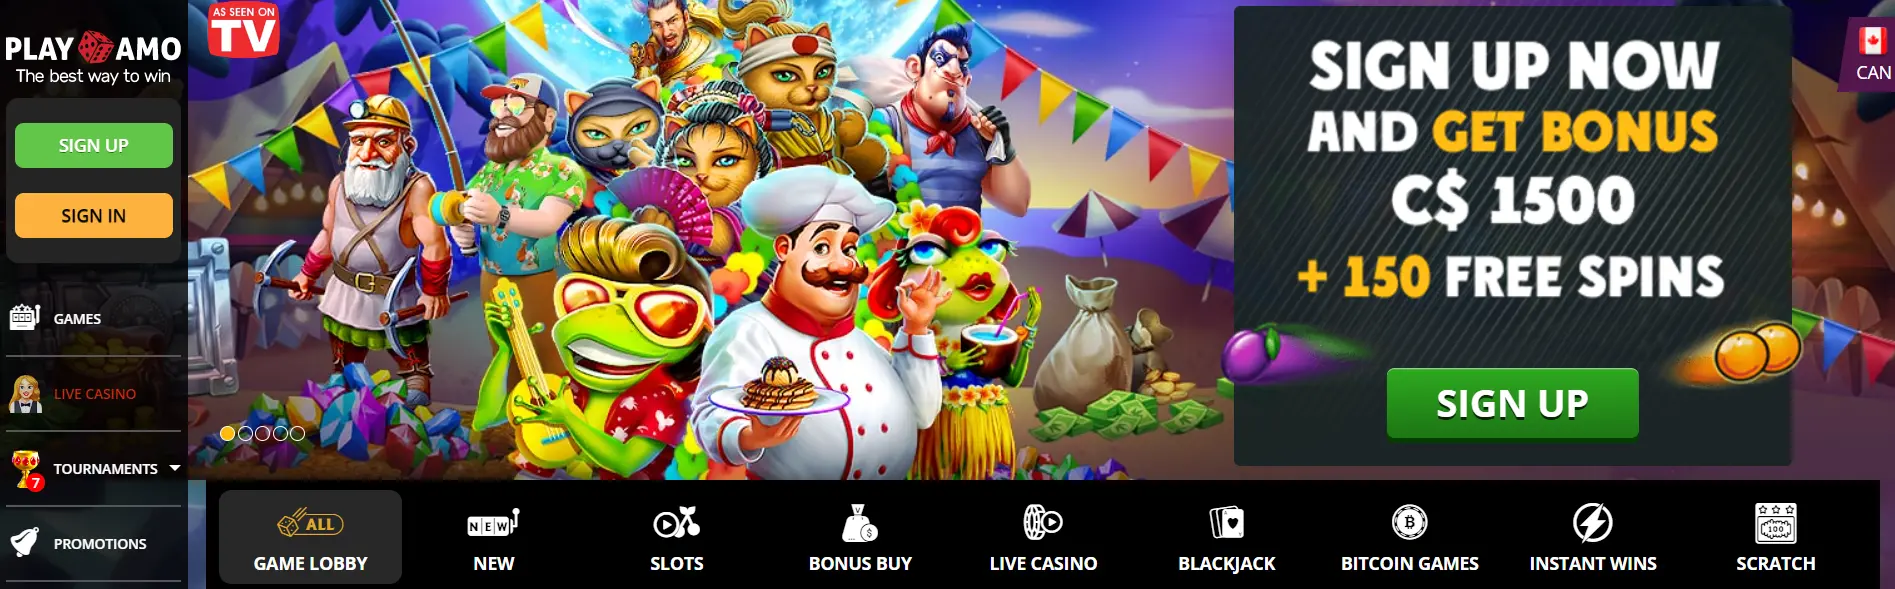 Screenshot of Play Amo - One of the Best Bitcoin Online Casino in Canada